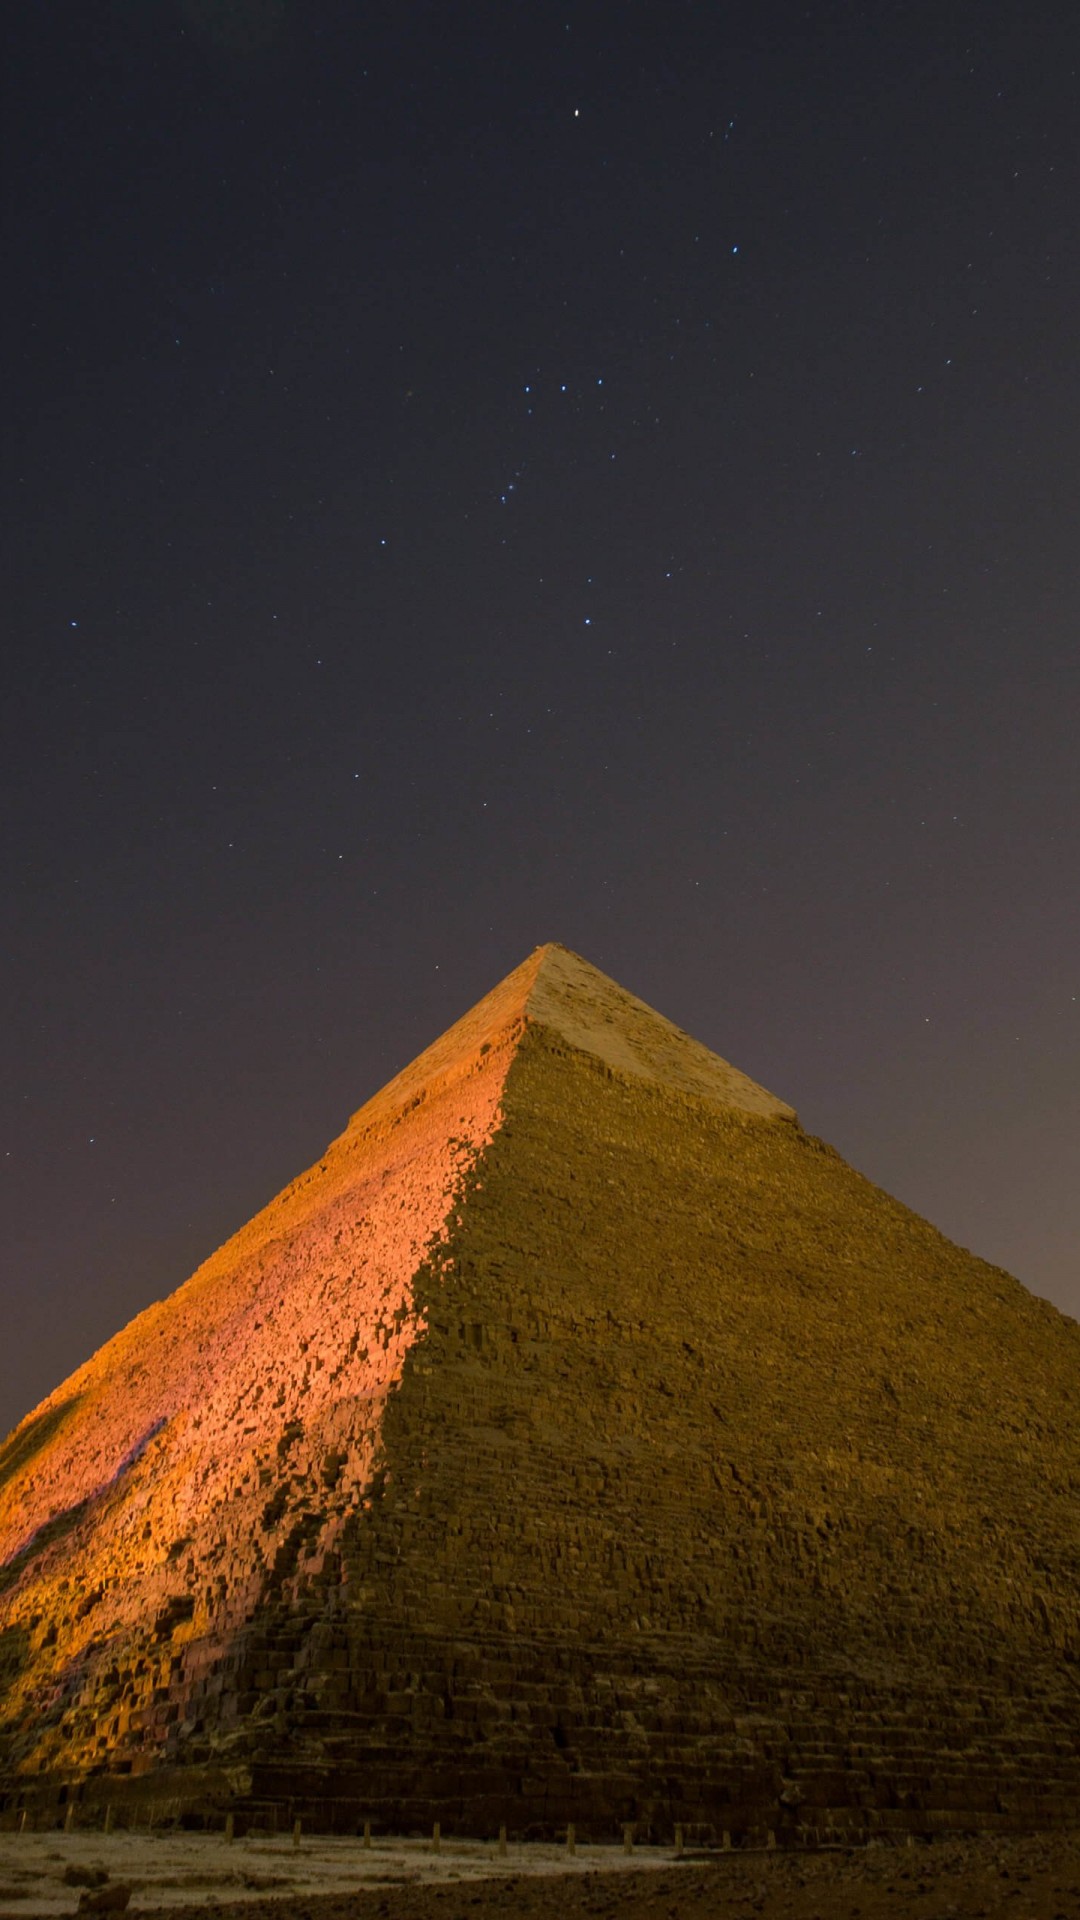 Download Pyramid by Night HD wallpaper for Xperia Z2 - HDwallpapers ...